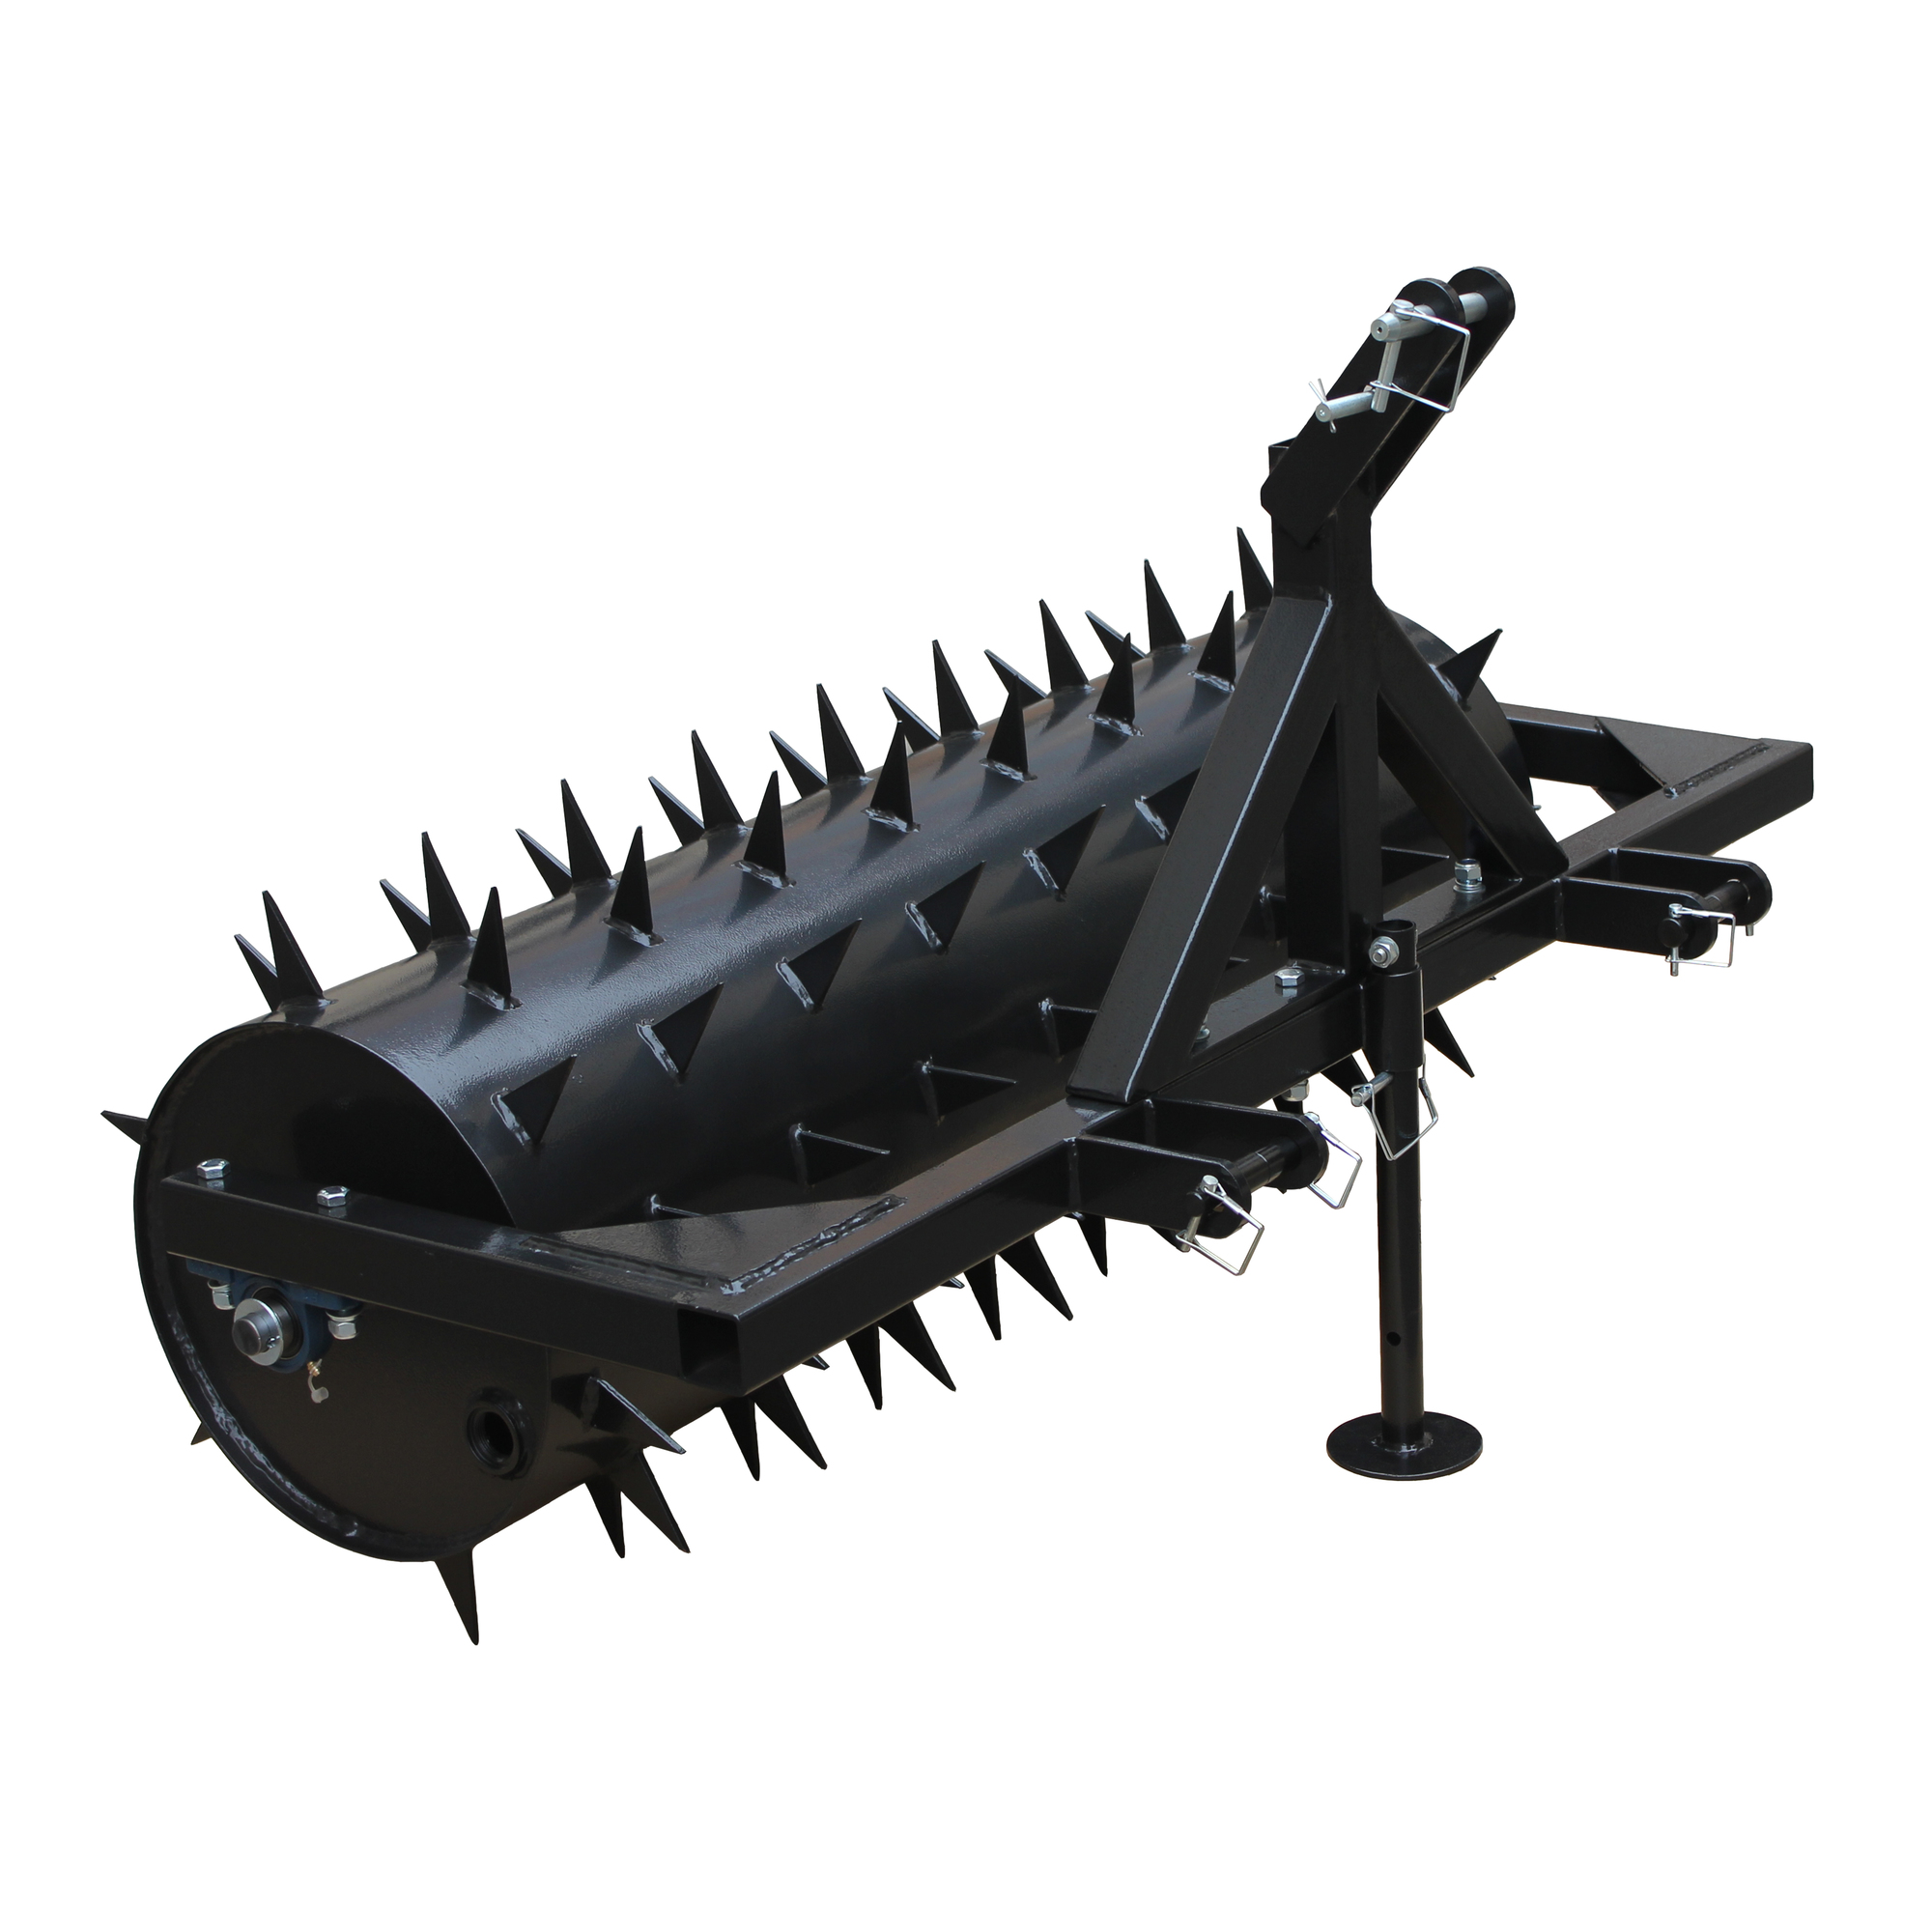 Yard Tuff, 60in. 3-Point Spike Aerator, Working Width 60 in, Max. Depth 2.5  in, Category Category 1 Model# YTF-60SA3PT